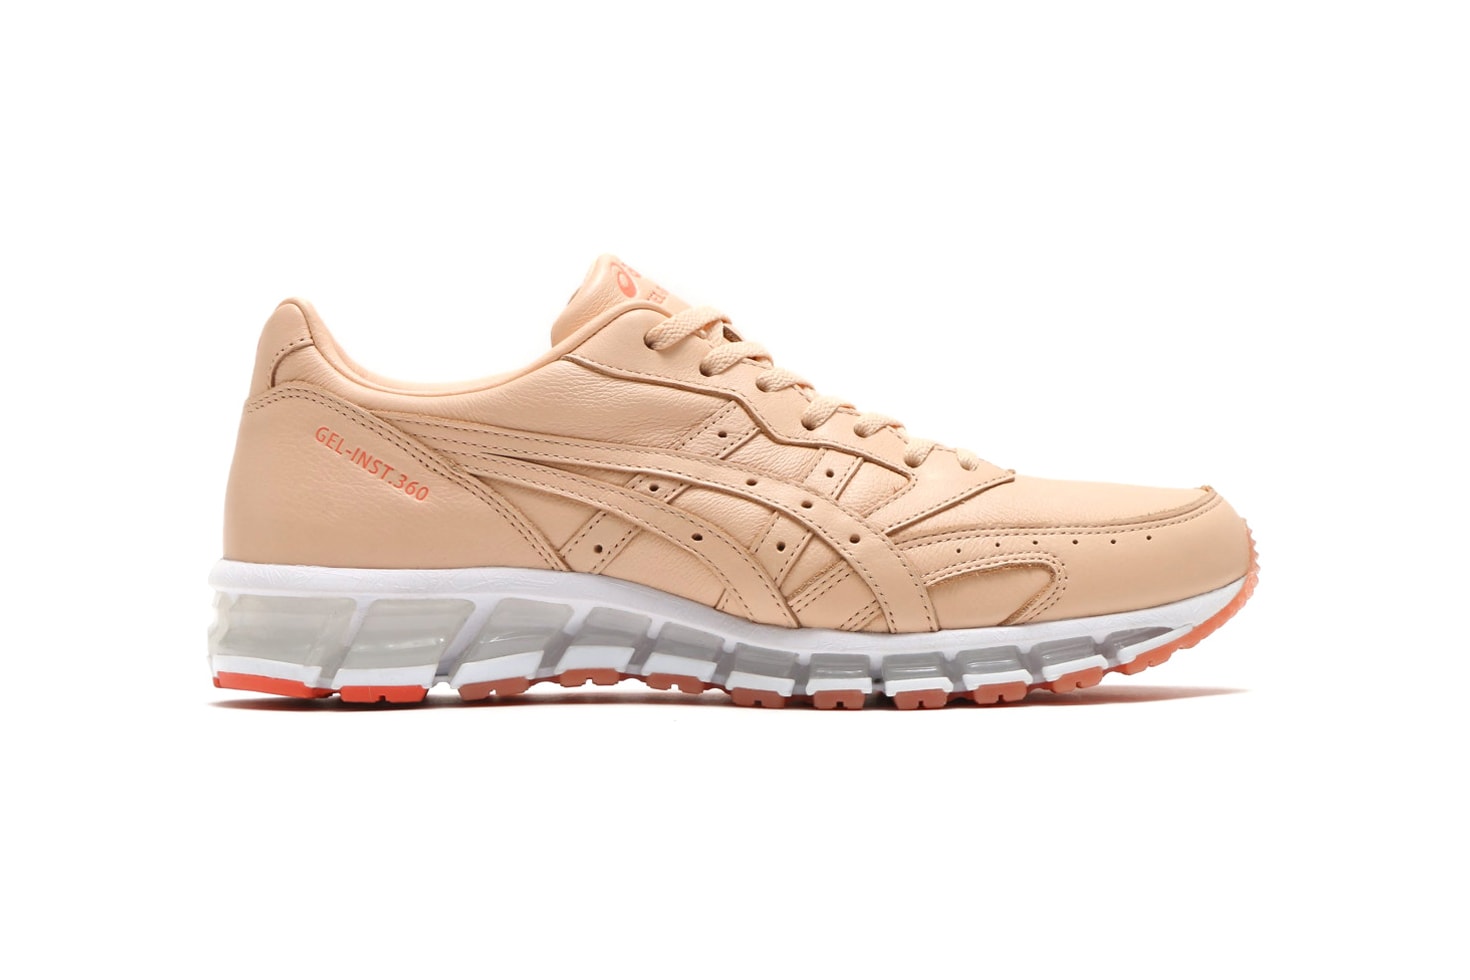 atmos ASICS GEL Inst 360 Collaborations ivory apricot ice 2018 april spring summer ss18 release date info drop sneakers shoes footwear